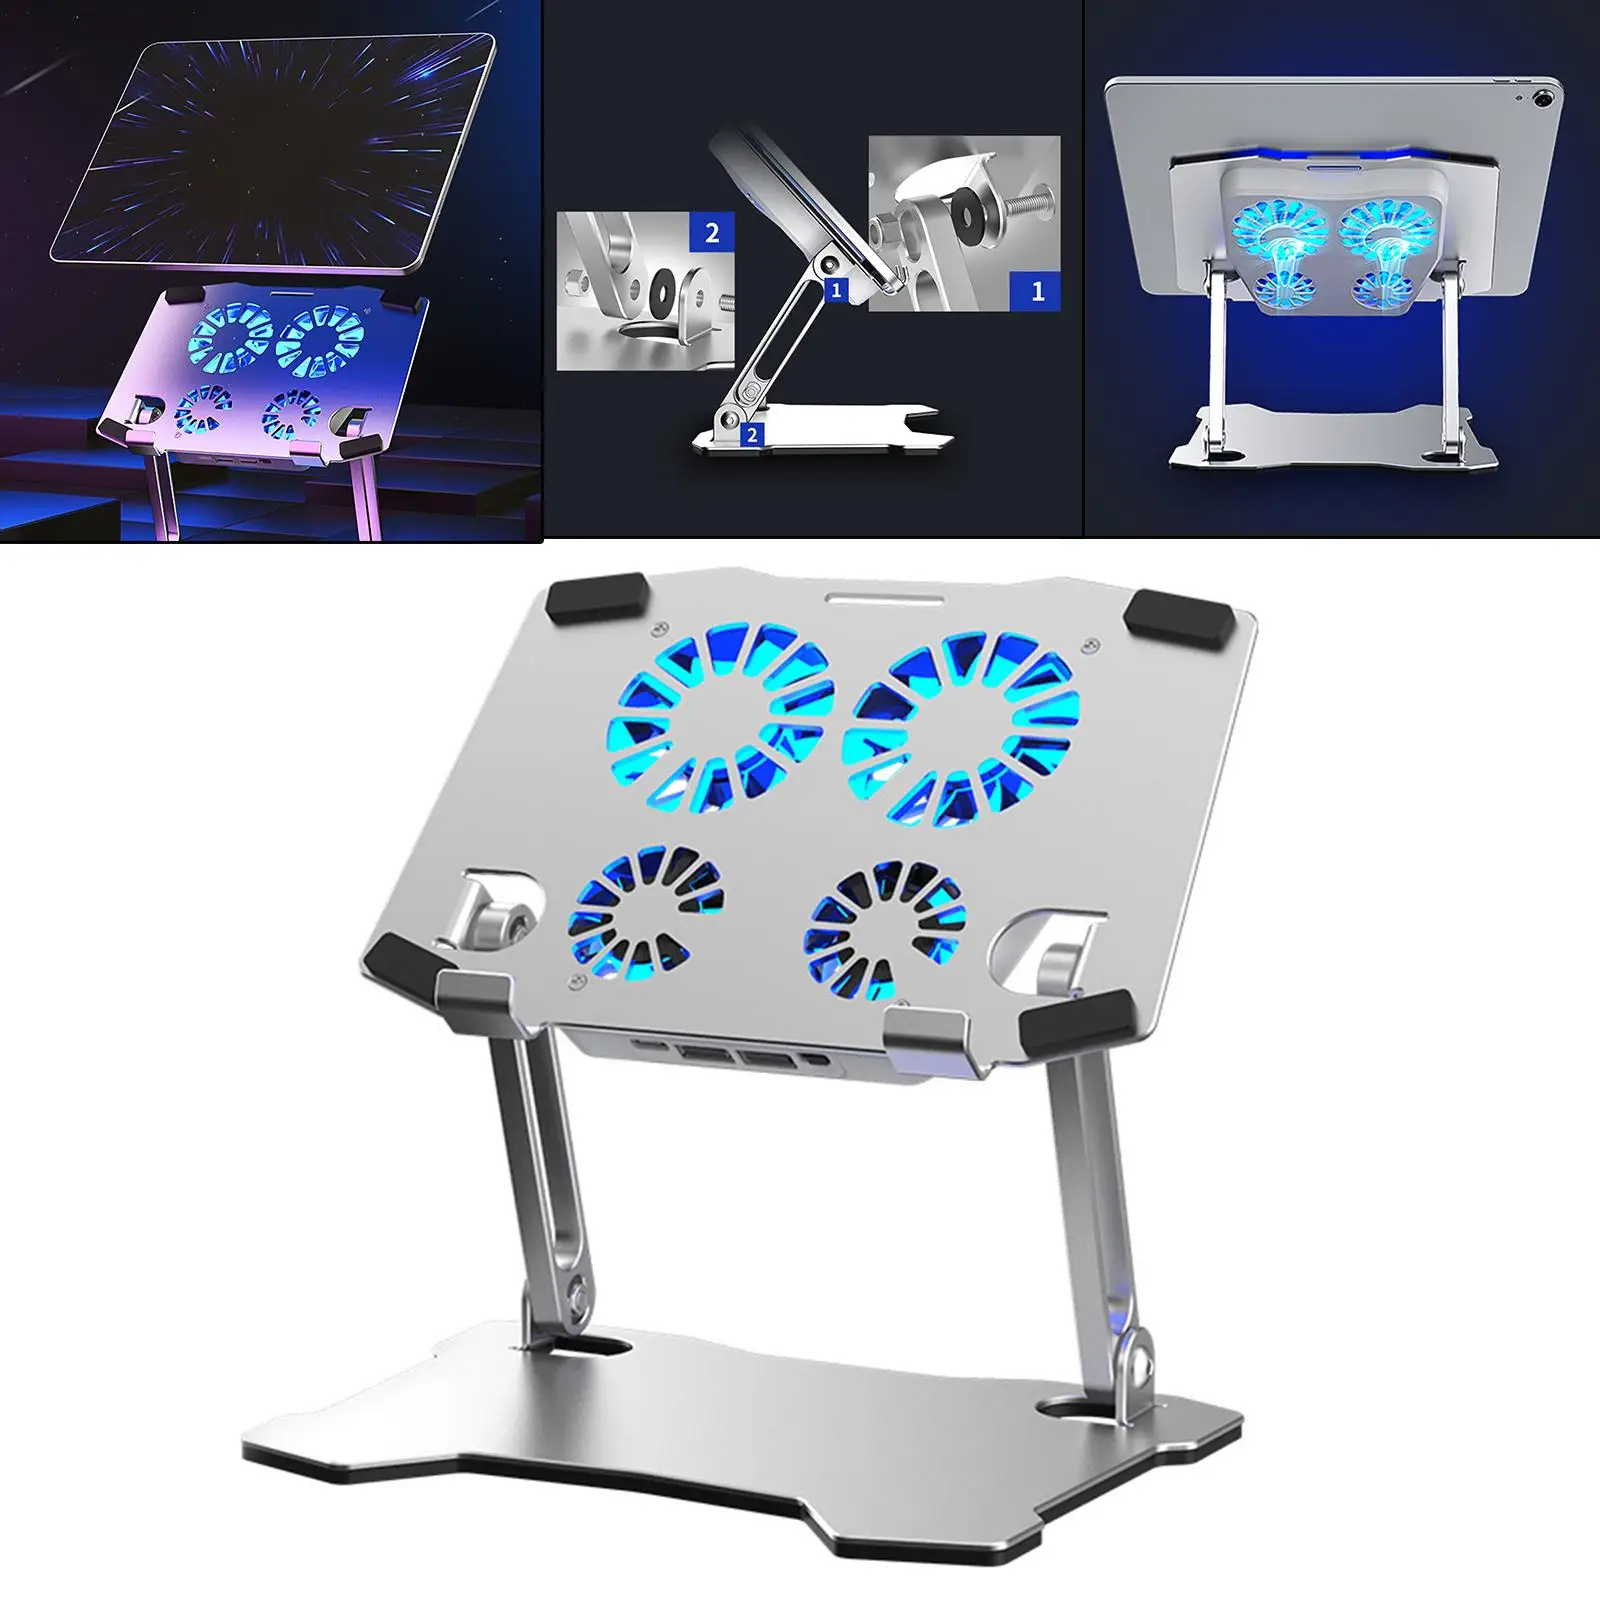 Adjustable Laptop Stand with Cooling Fan for Laptops up to 17.3